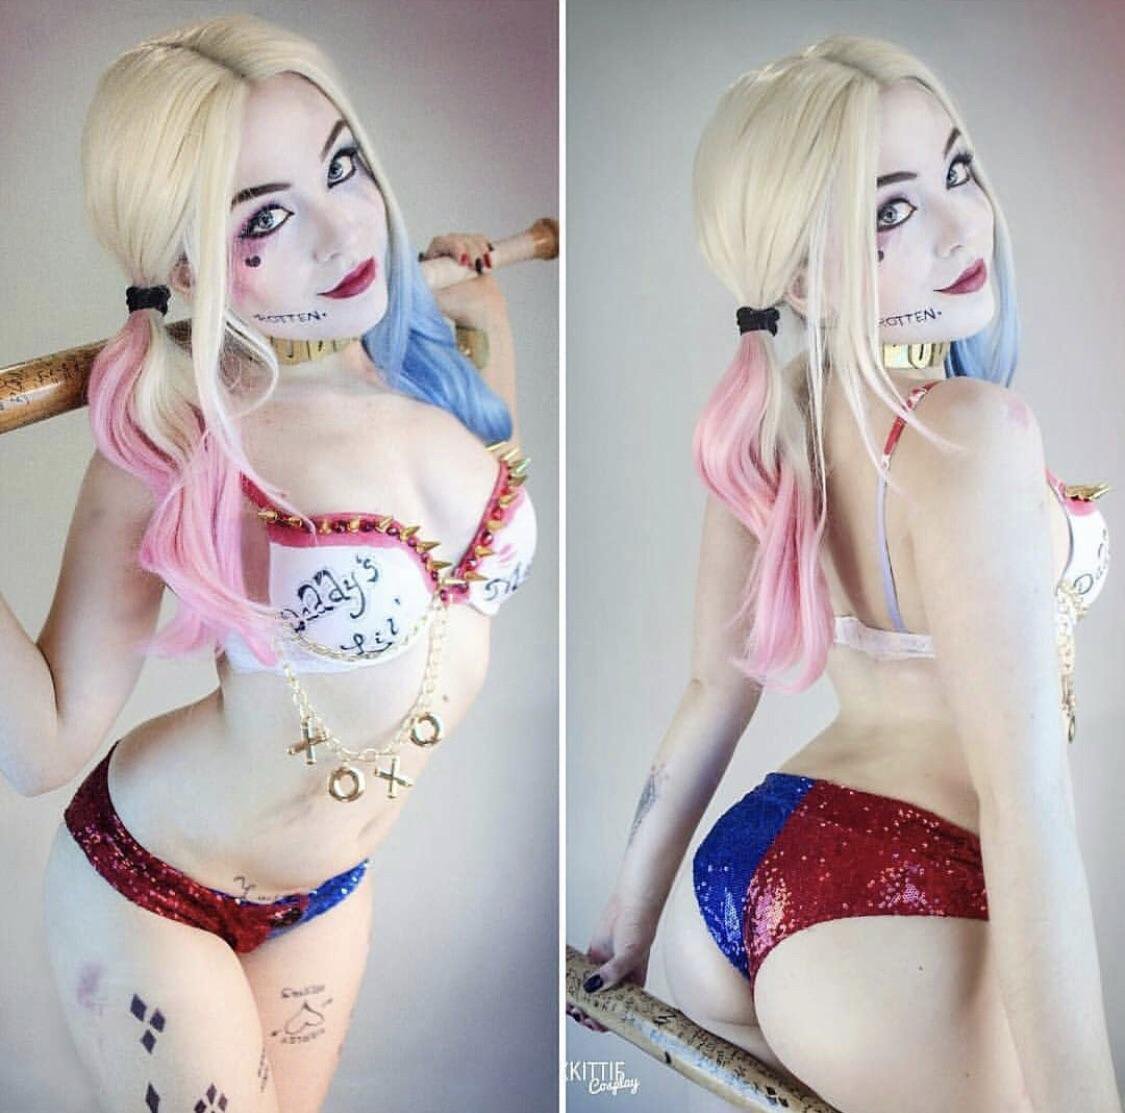 Harley Quinn From Suicide Squad Cosplay Done By Jinxkittieco